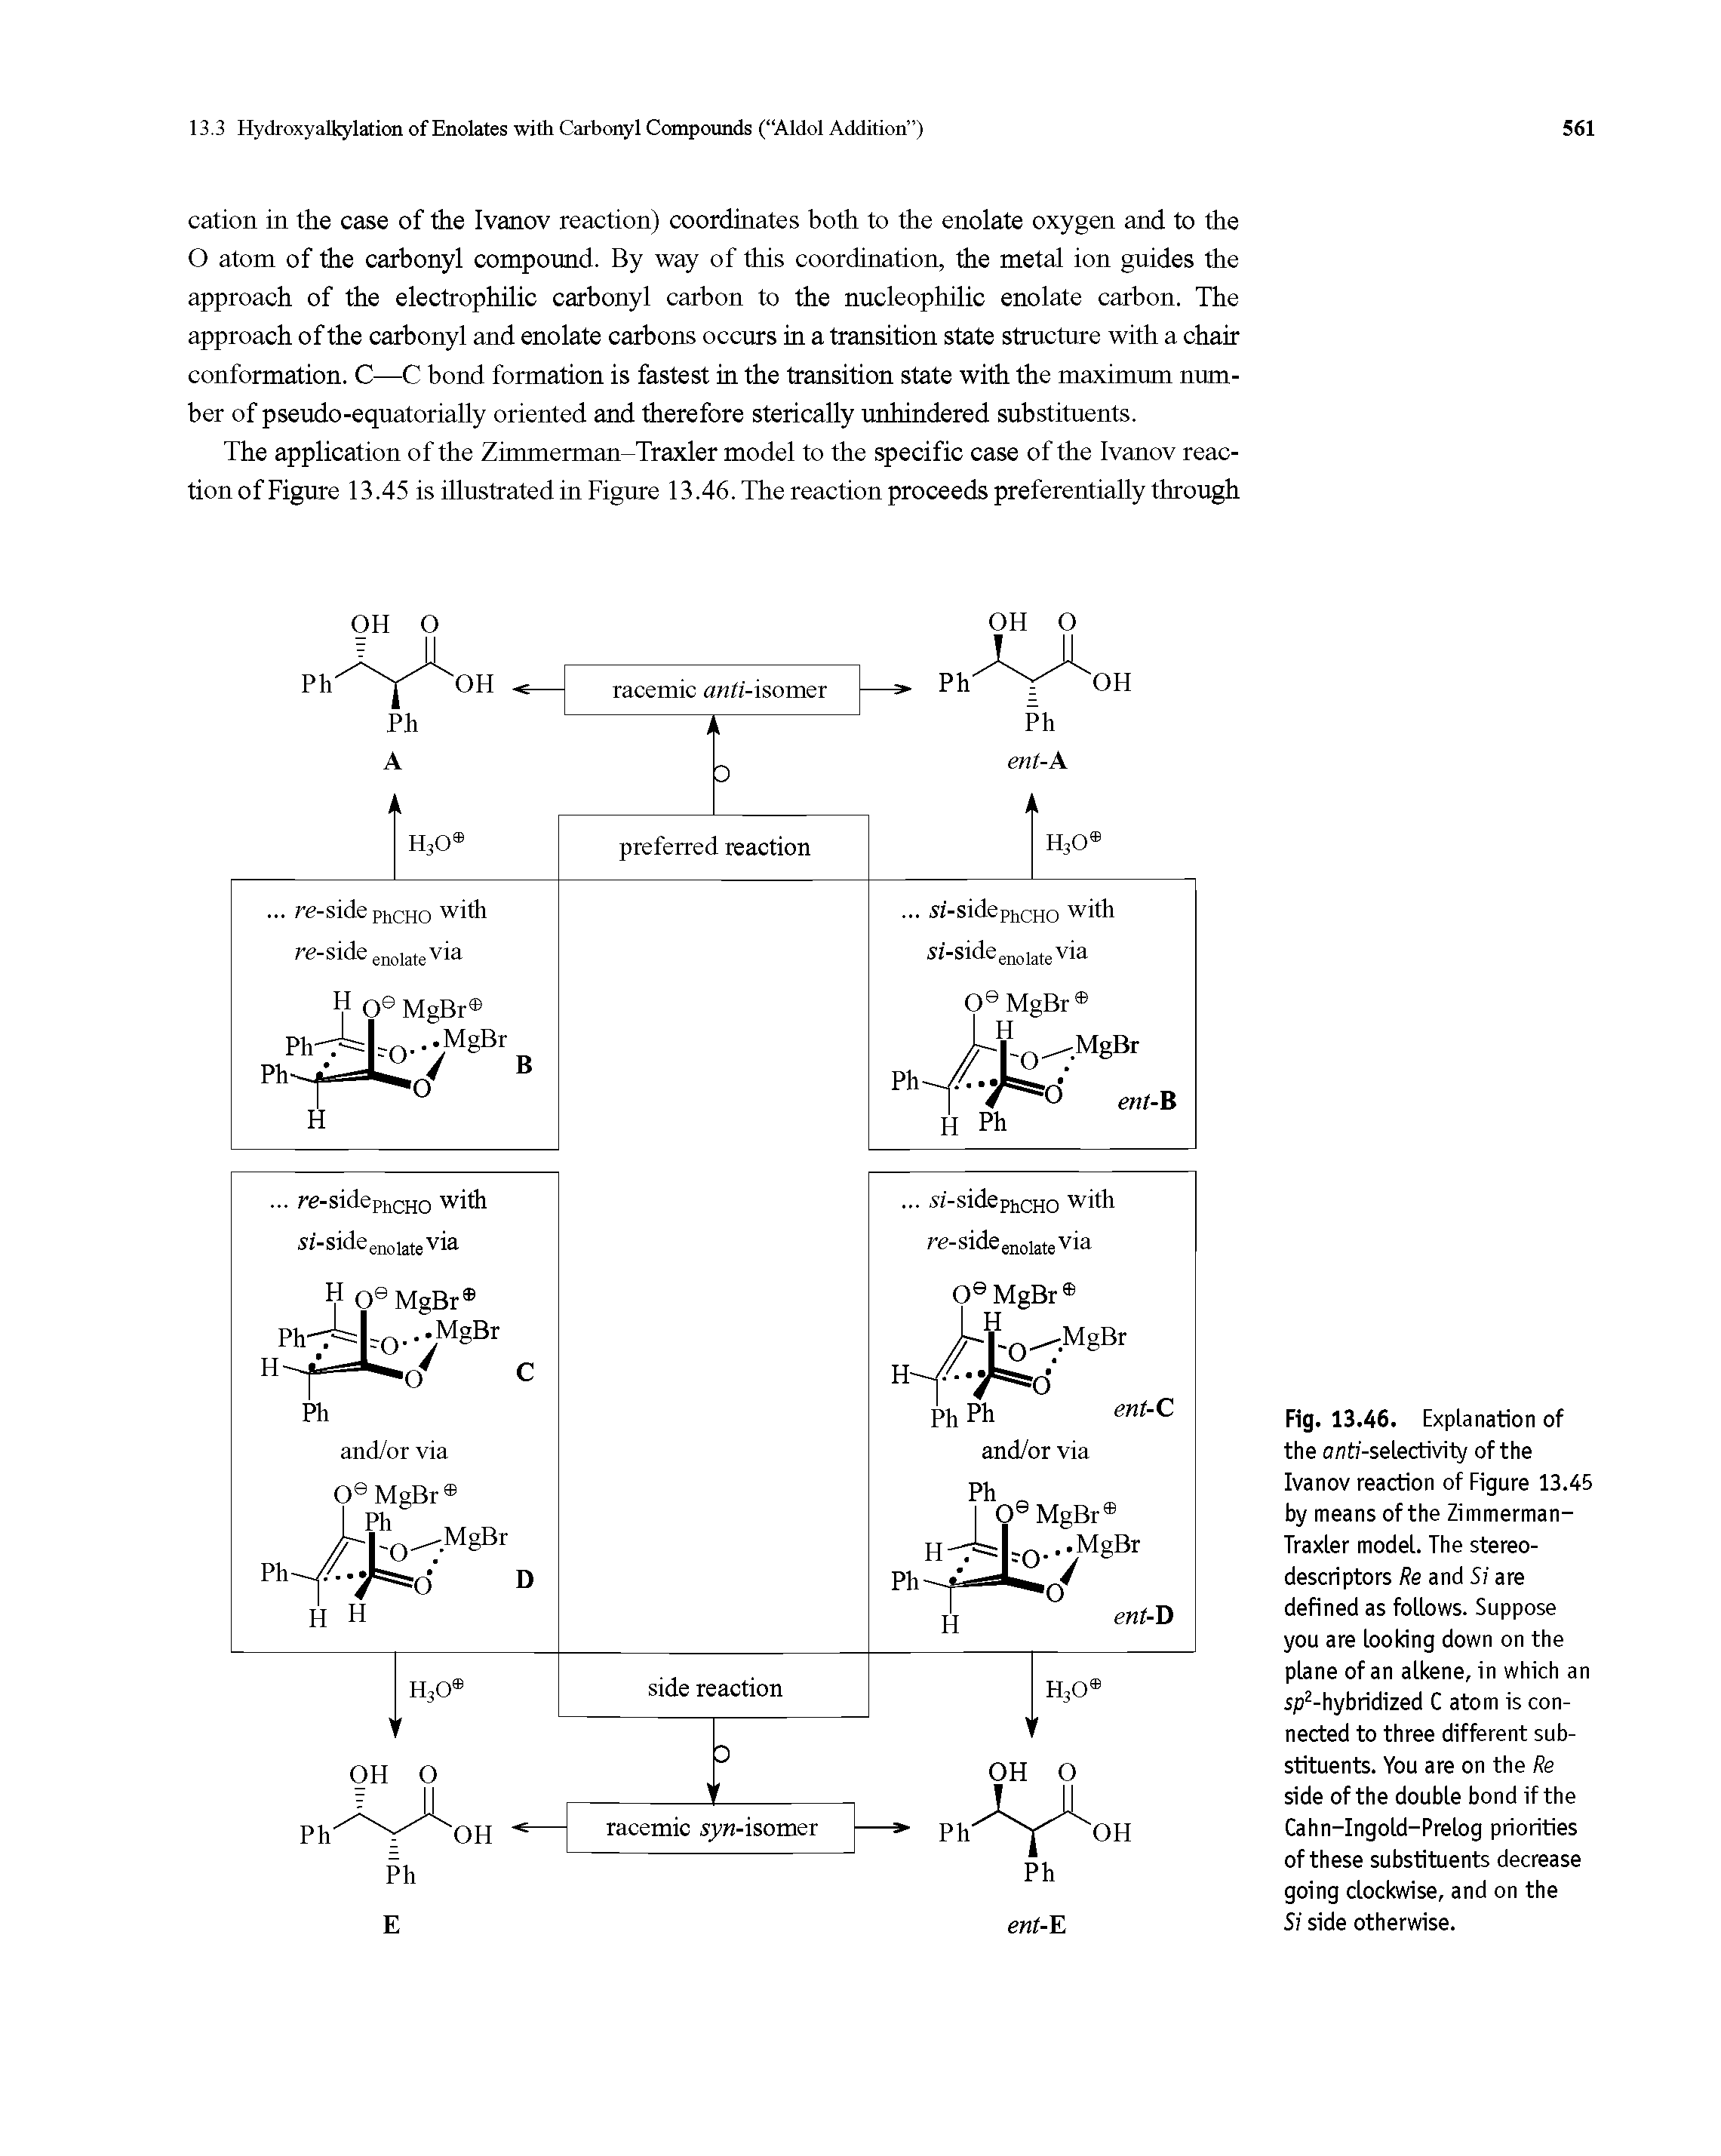 Fig. 13.46. Explanation of the anti-selectivity of the Ivanov reaction of Figure 13.45 by means of the Zimmerman-Traxler model. The stereodescriptors Re and Si are defined as follows. Suppose you are looking down on the plane of an alkene, in which an sp2-hybridized C atom is connected to three different substituents. You are on the Re side of the double bond if the Cahn-Ingold-Prelog priorities of these substituents decrease going clockwise, and on the Si side otherwise.